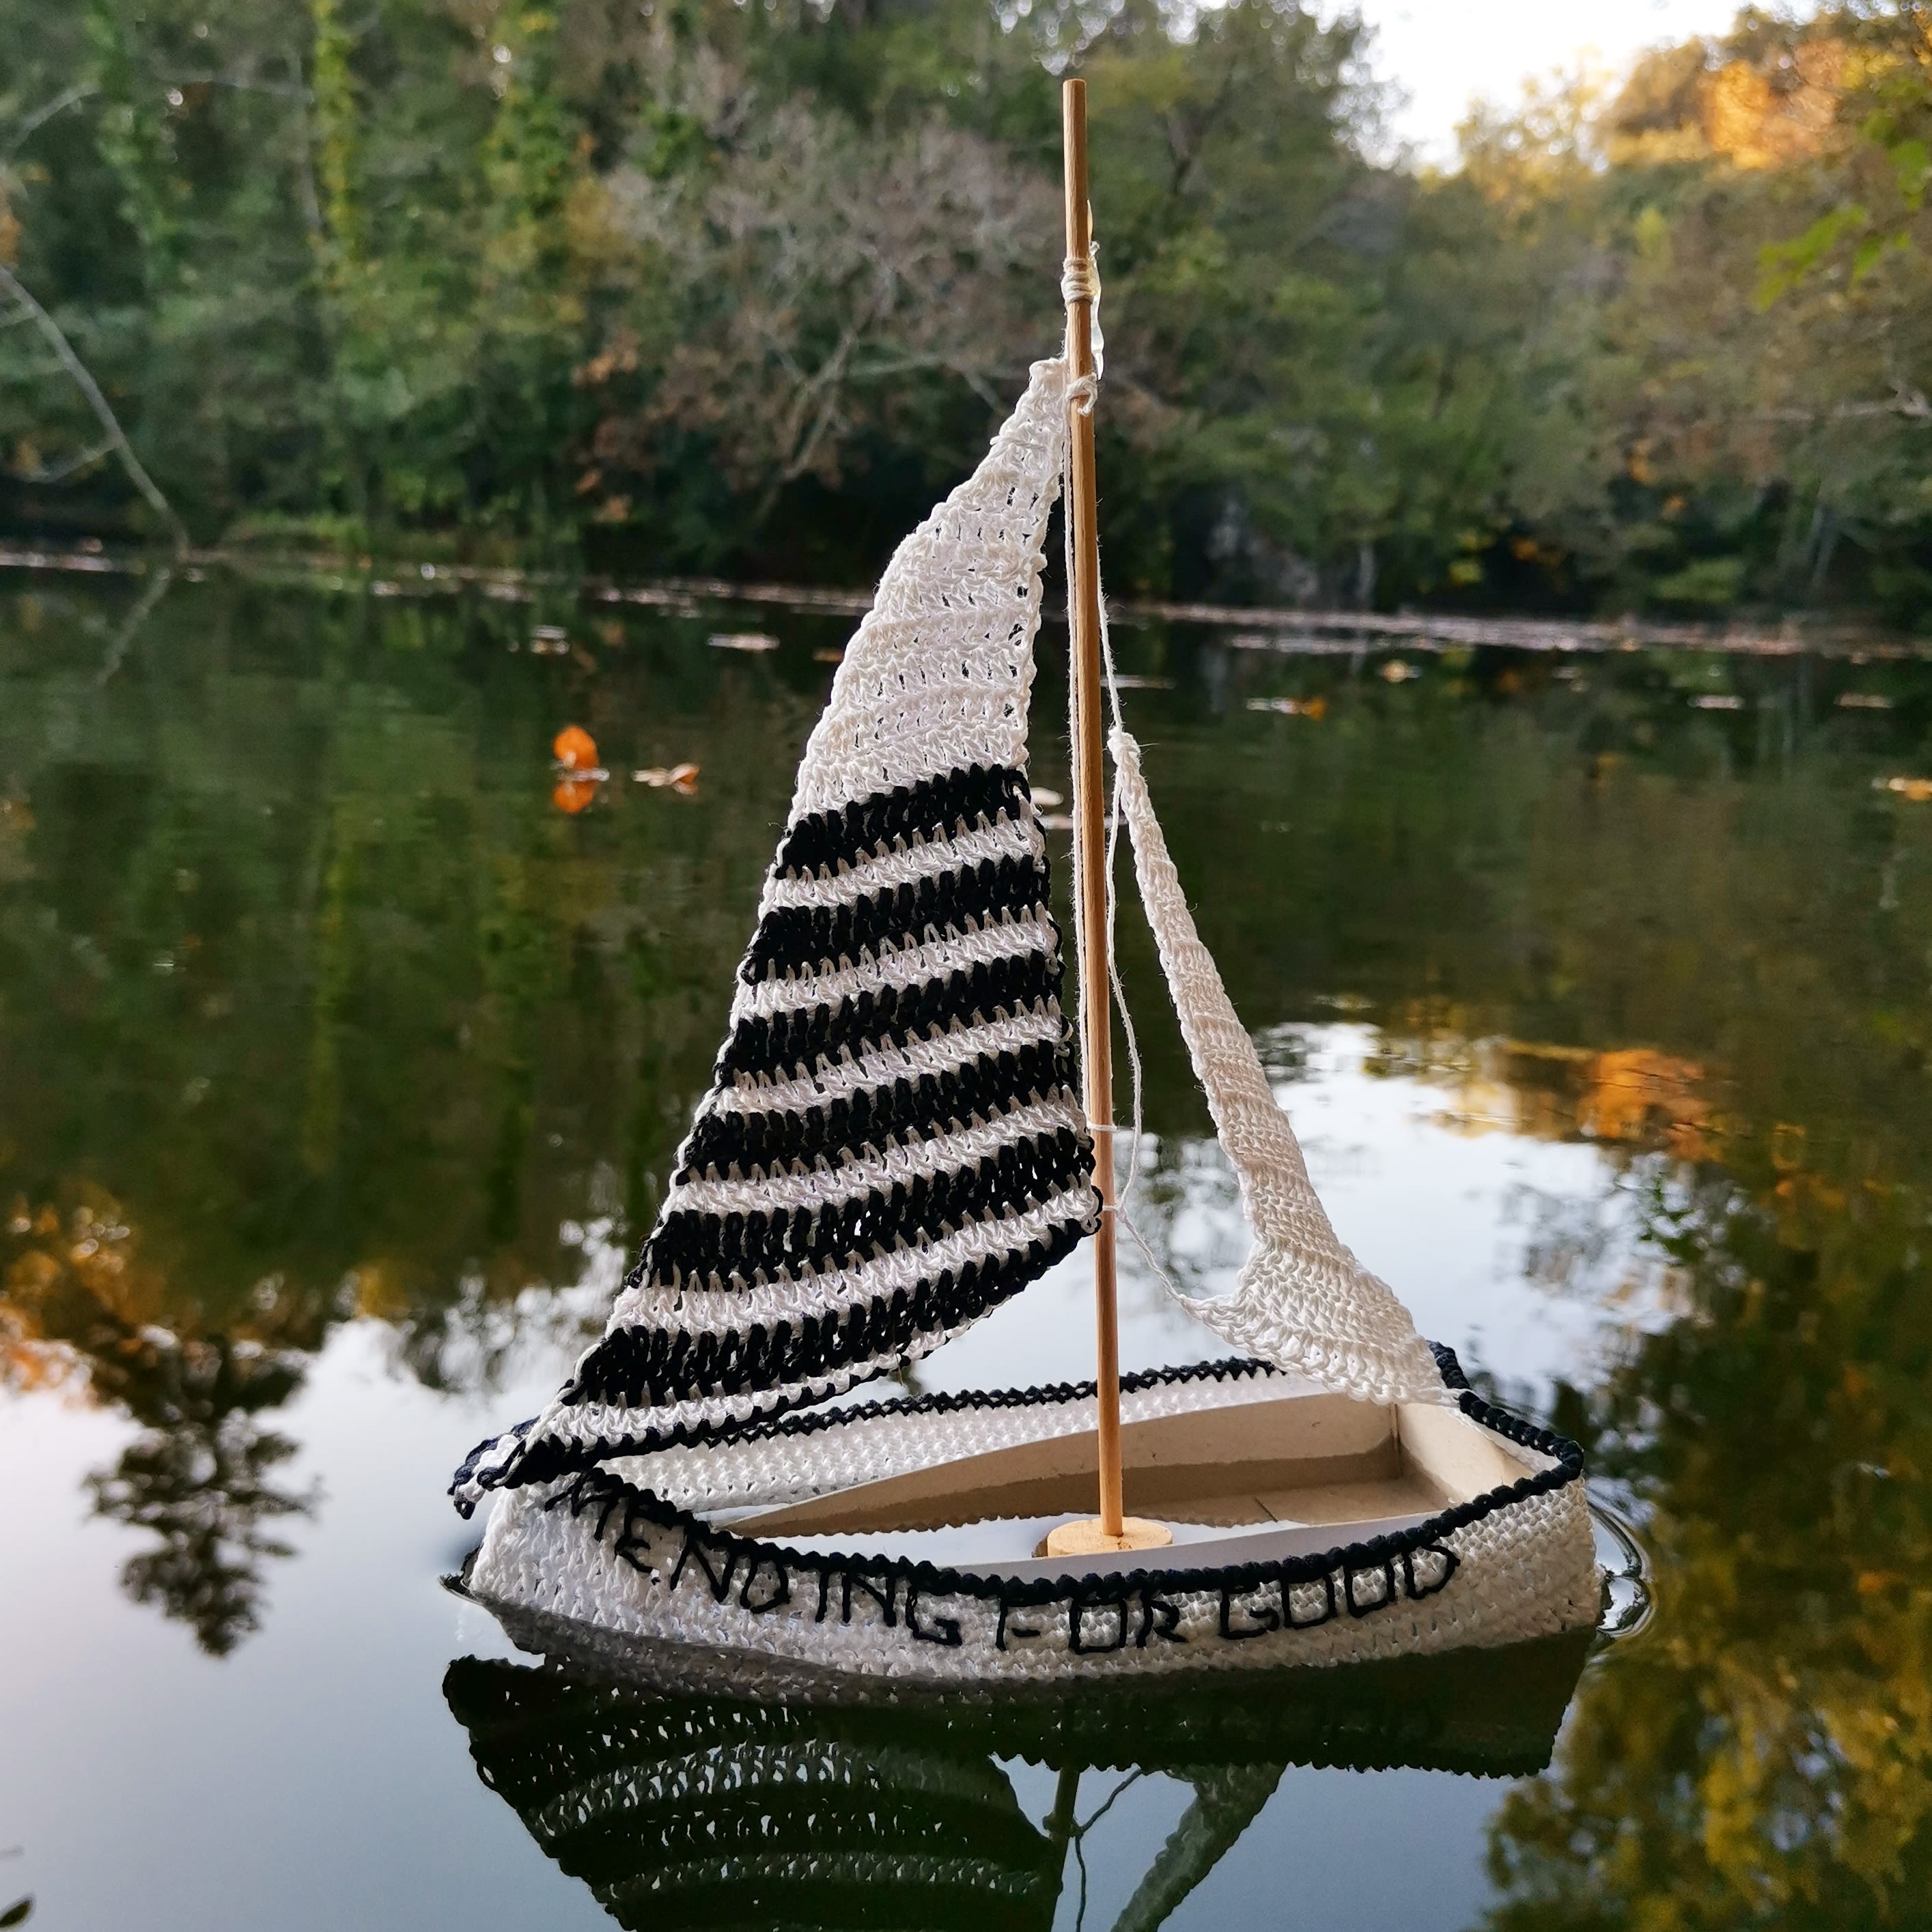 wooden model sized boat covered in a crochet monochrome design, with crocheted sails, floating on a body of water